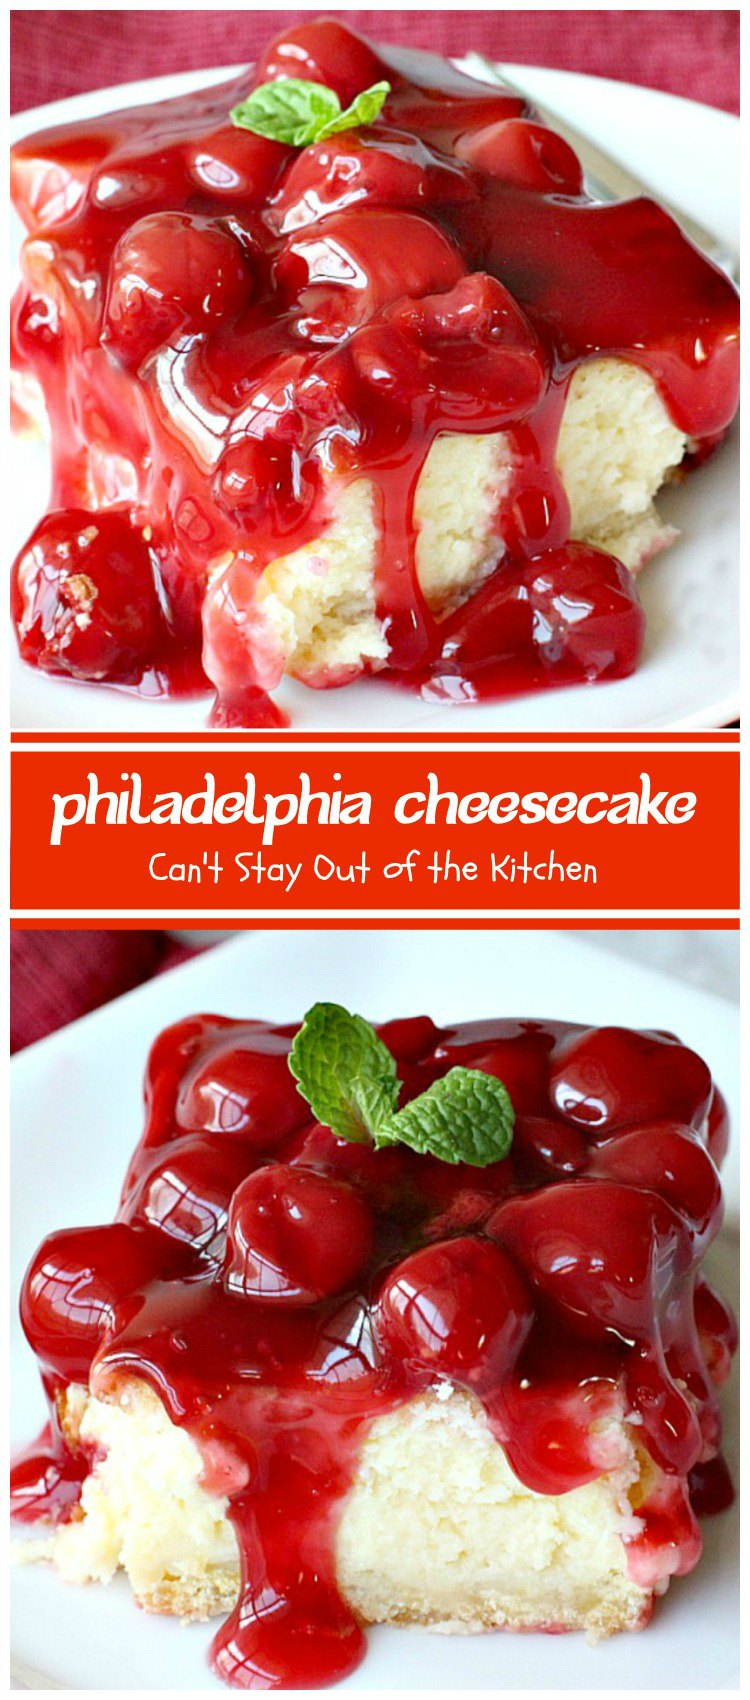 Philadelphia Cheesecake | Can't Stay Out of the Kitchen